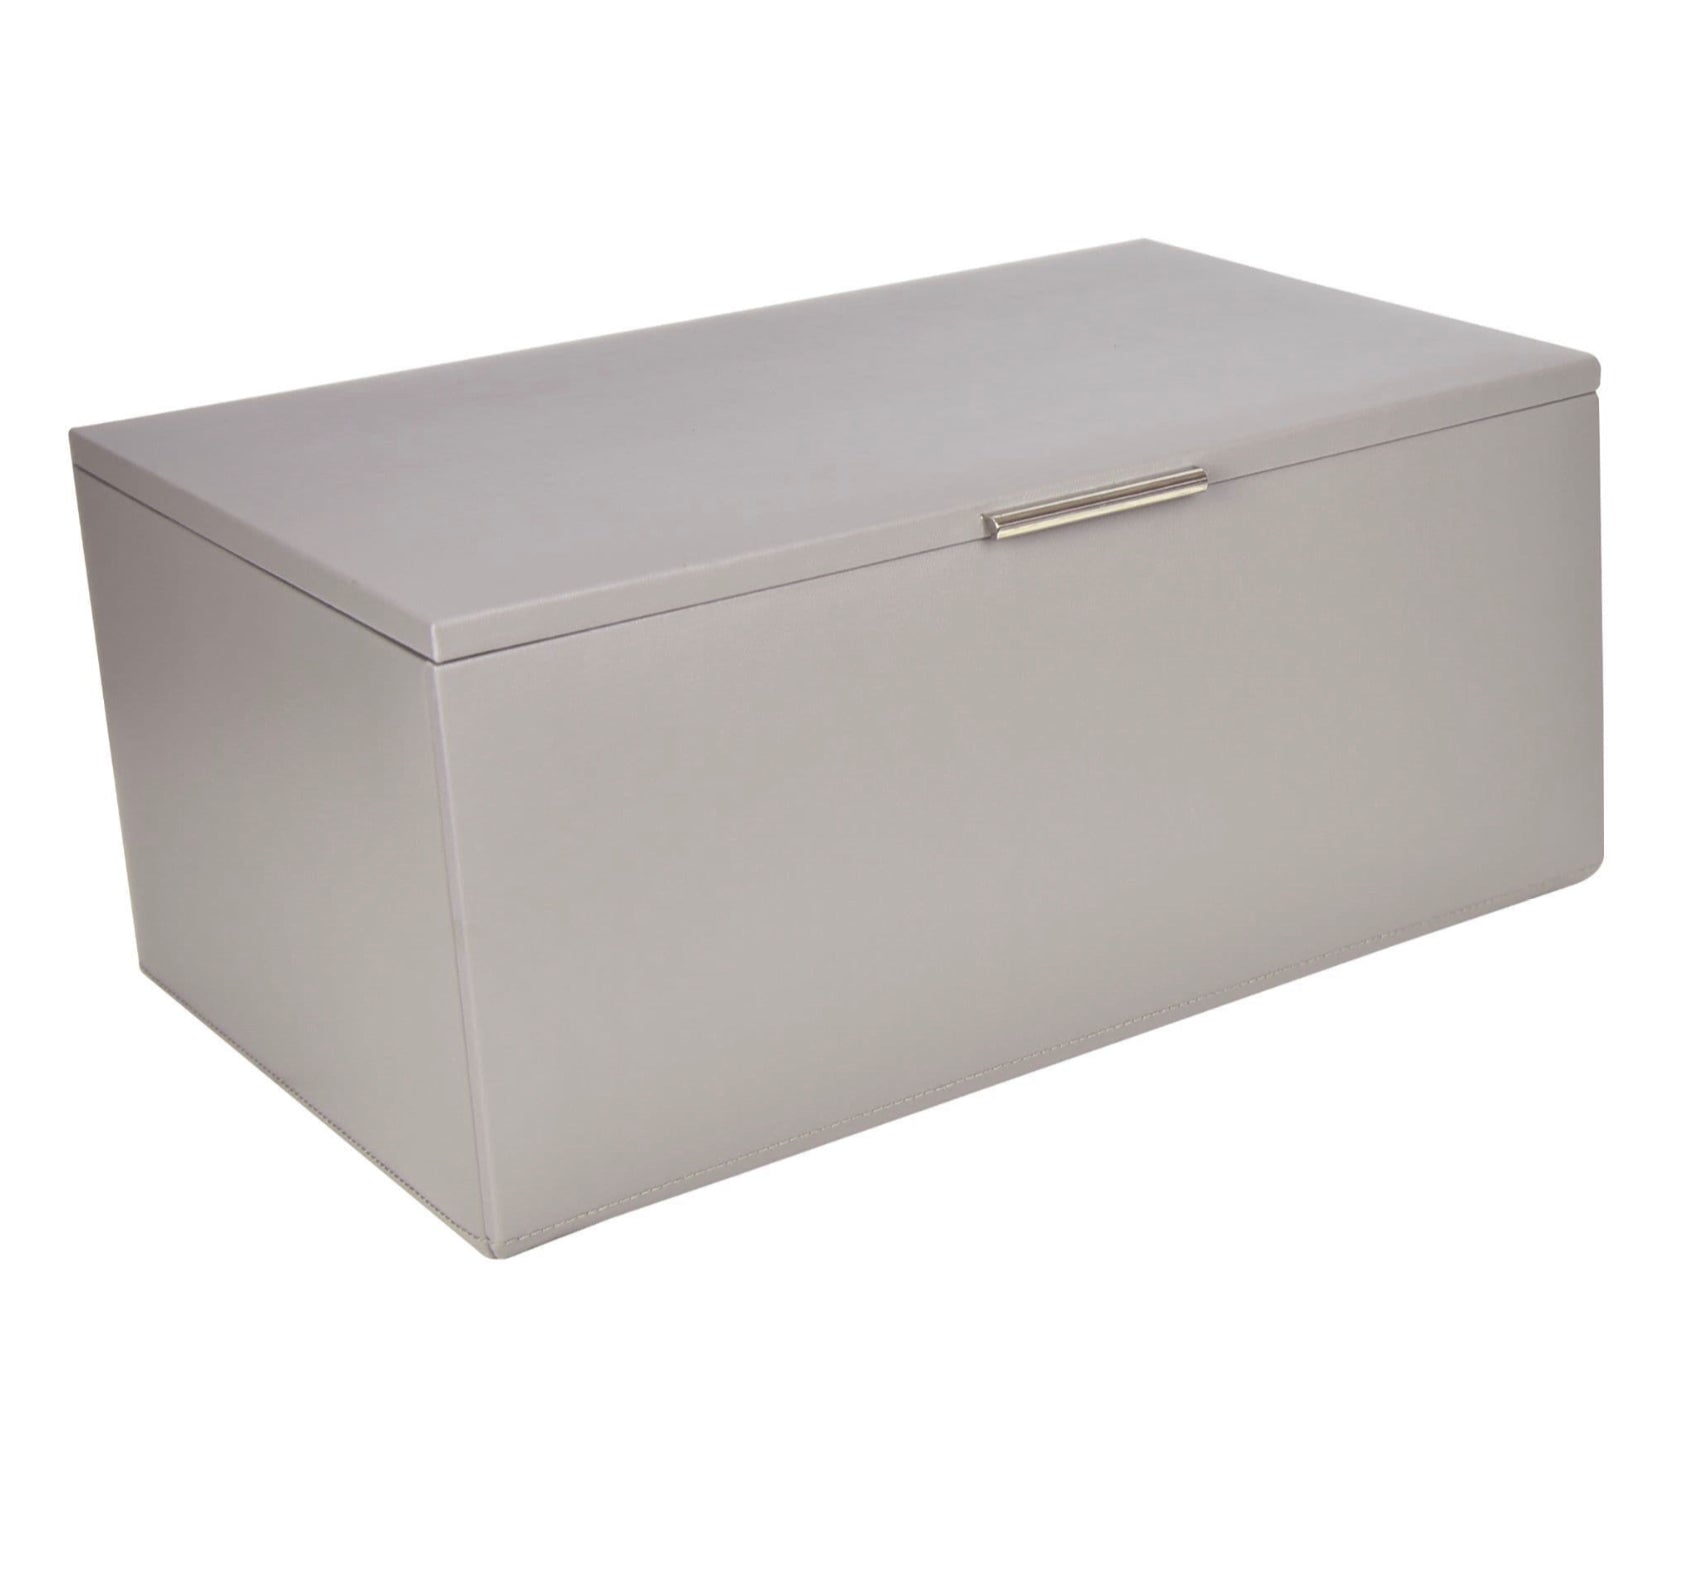 Notting Hill Extra Large Grey Jewellery Box 71177 Dulwich Designs